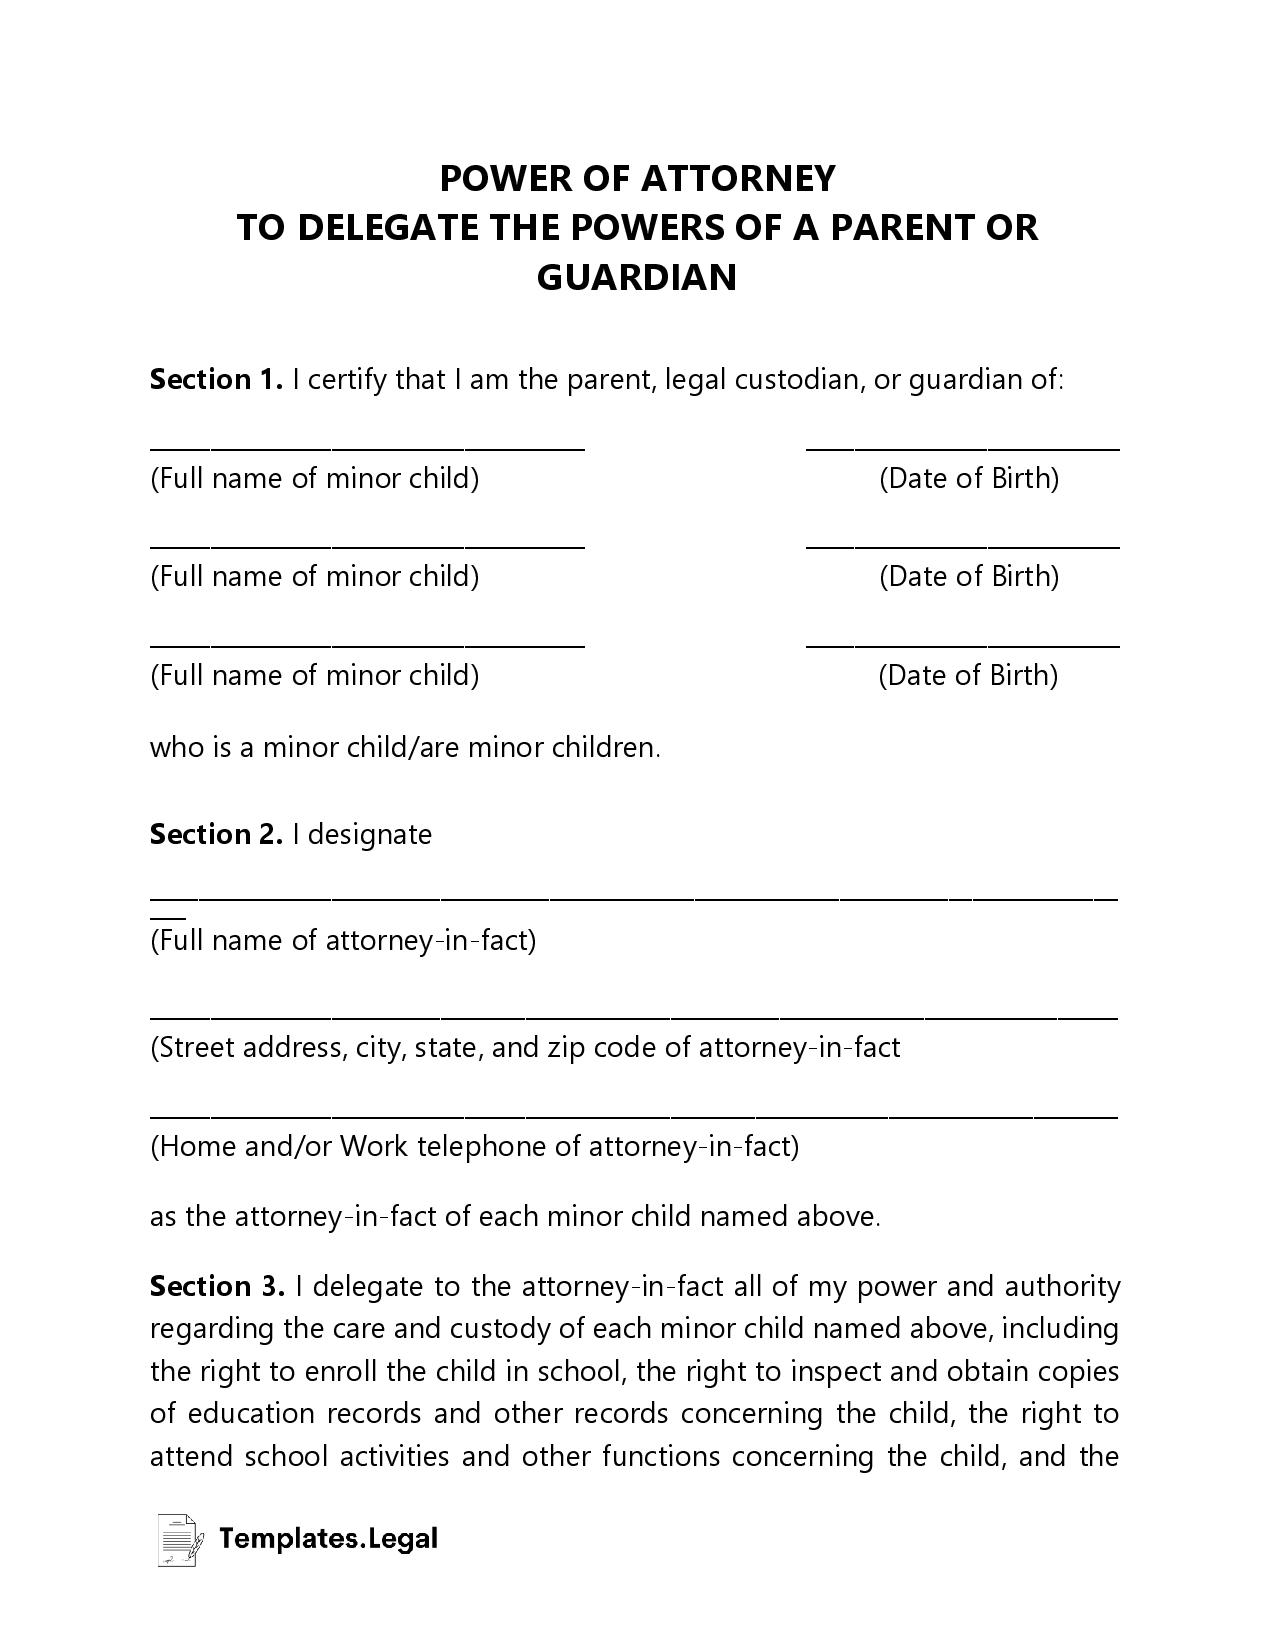 Minor (Child) Power of Attorney - Templates.Legal